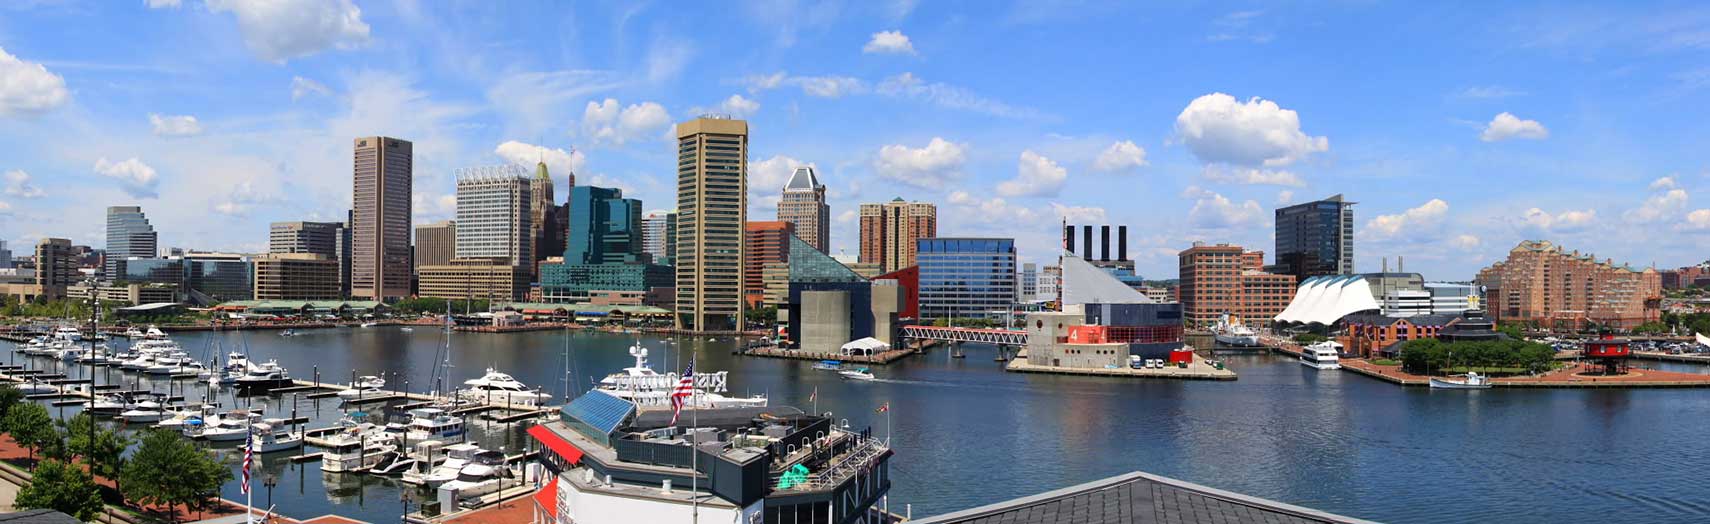 Panorama of Baltimore, showing the Inner Harbor and adjacent buildings in Baltimore, Maryland